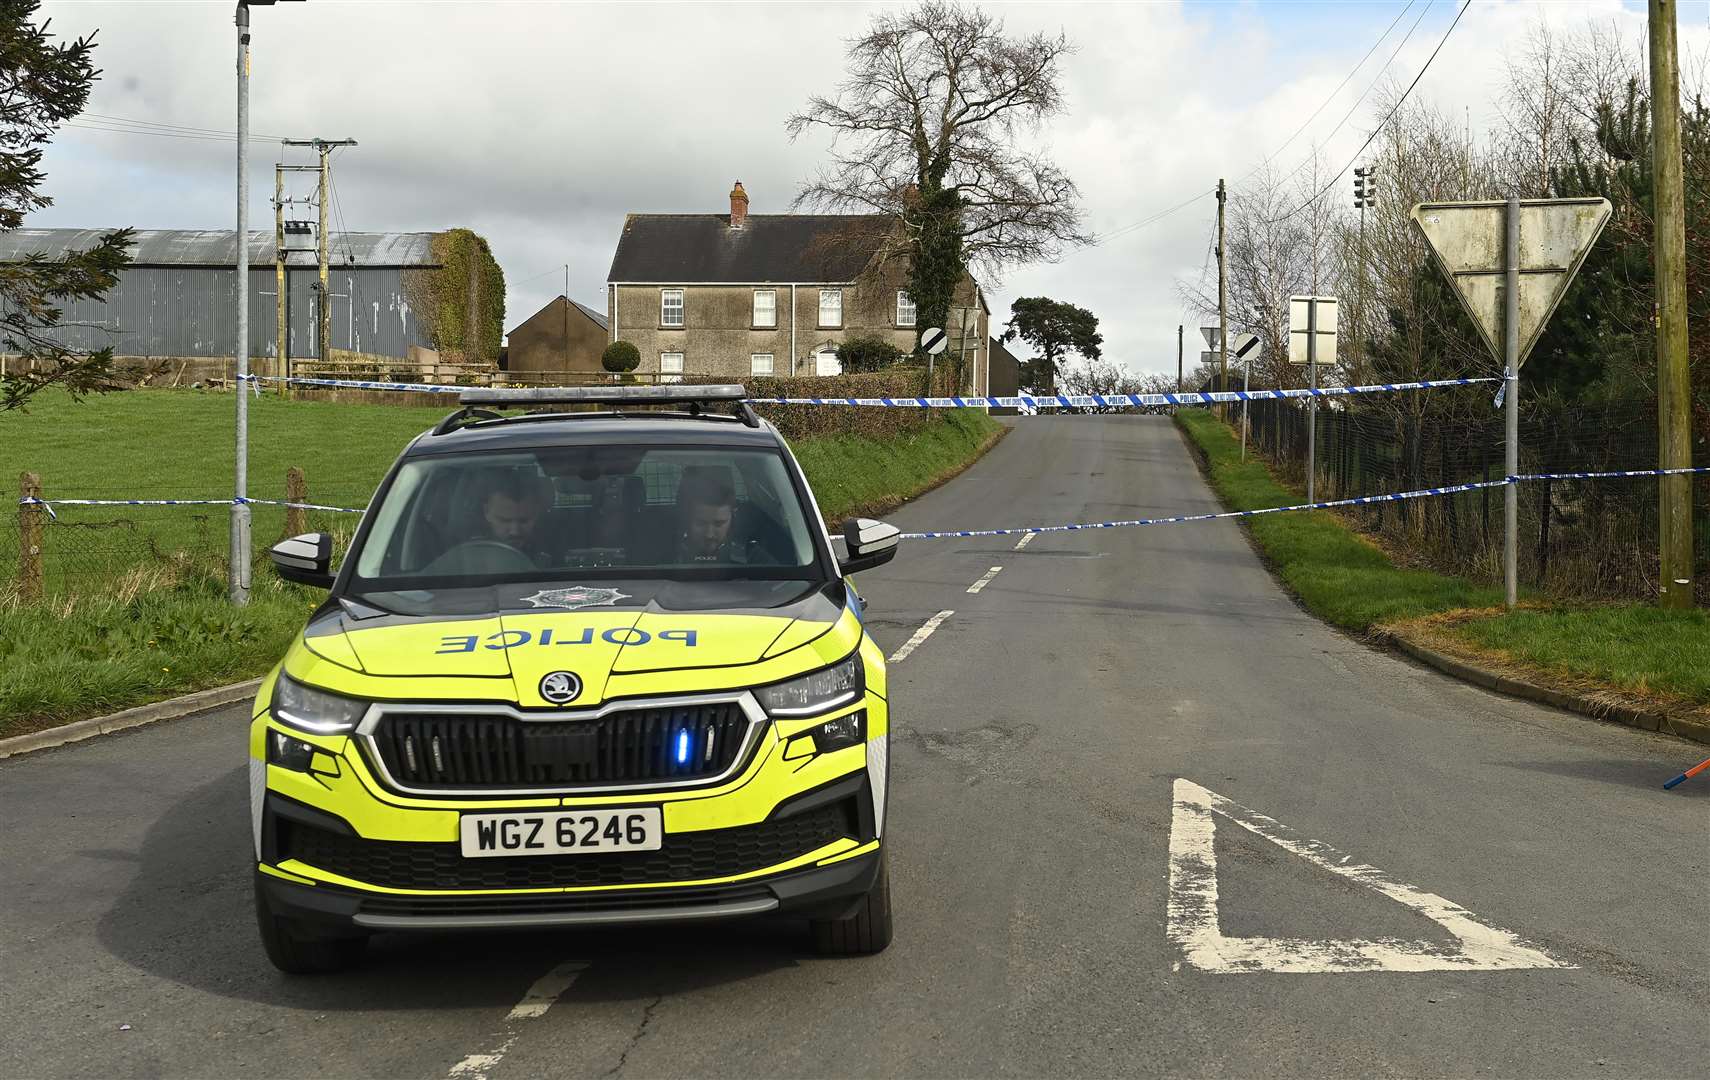 The Ballynahonemore Road where the crash happened remained closed on Monday as police continue to conduct inquiries (Oliver McVeigh/PA)